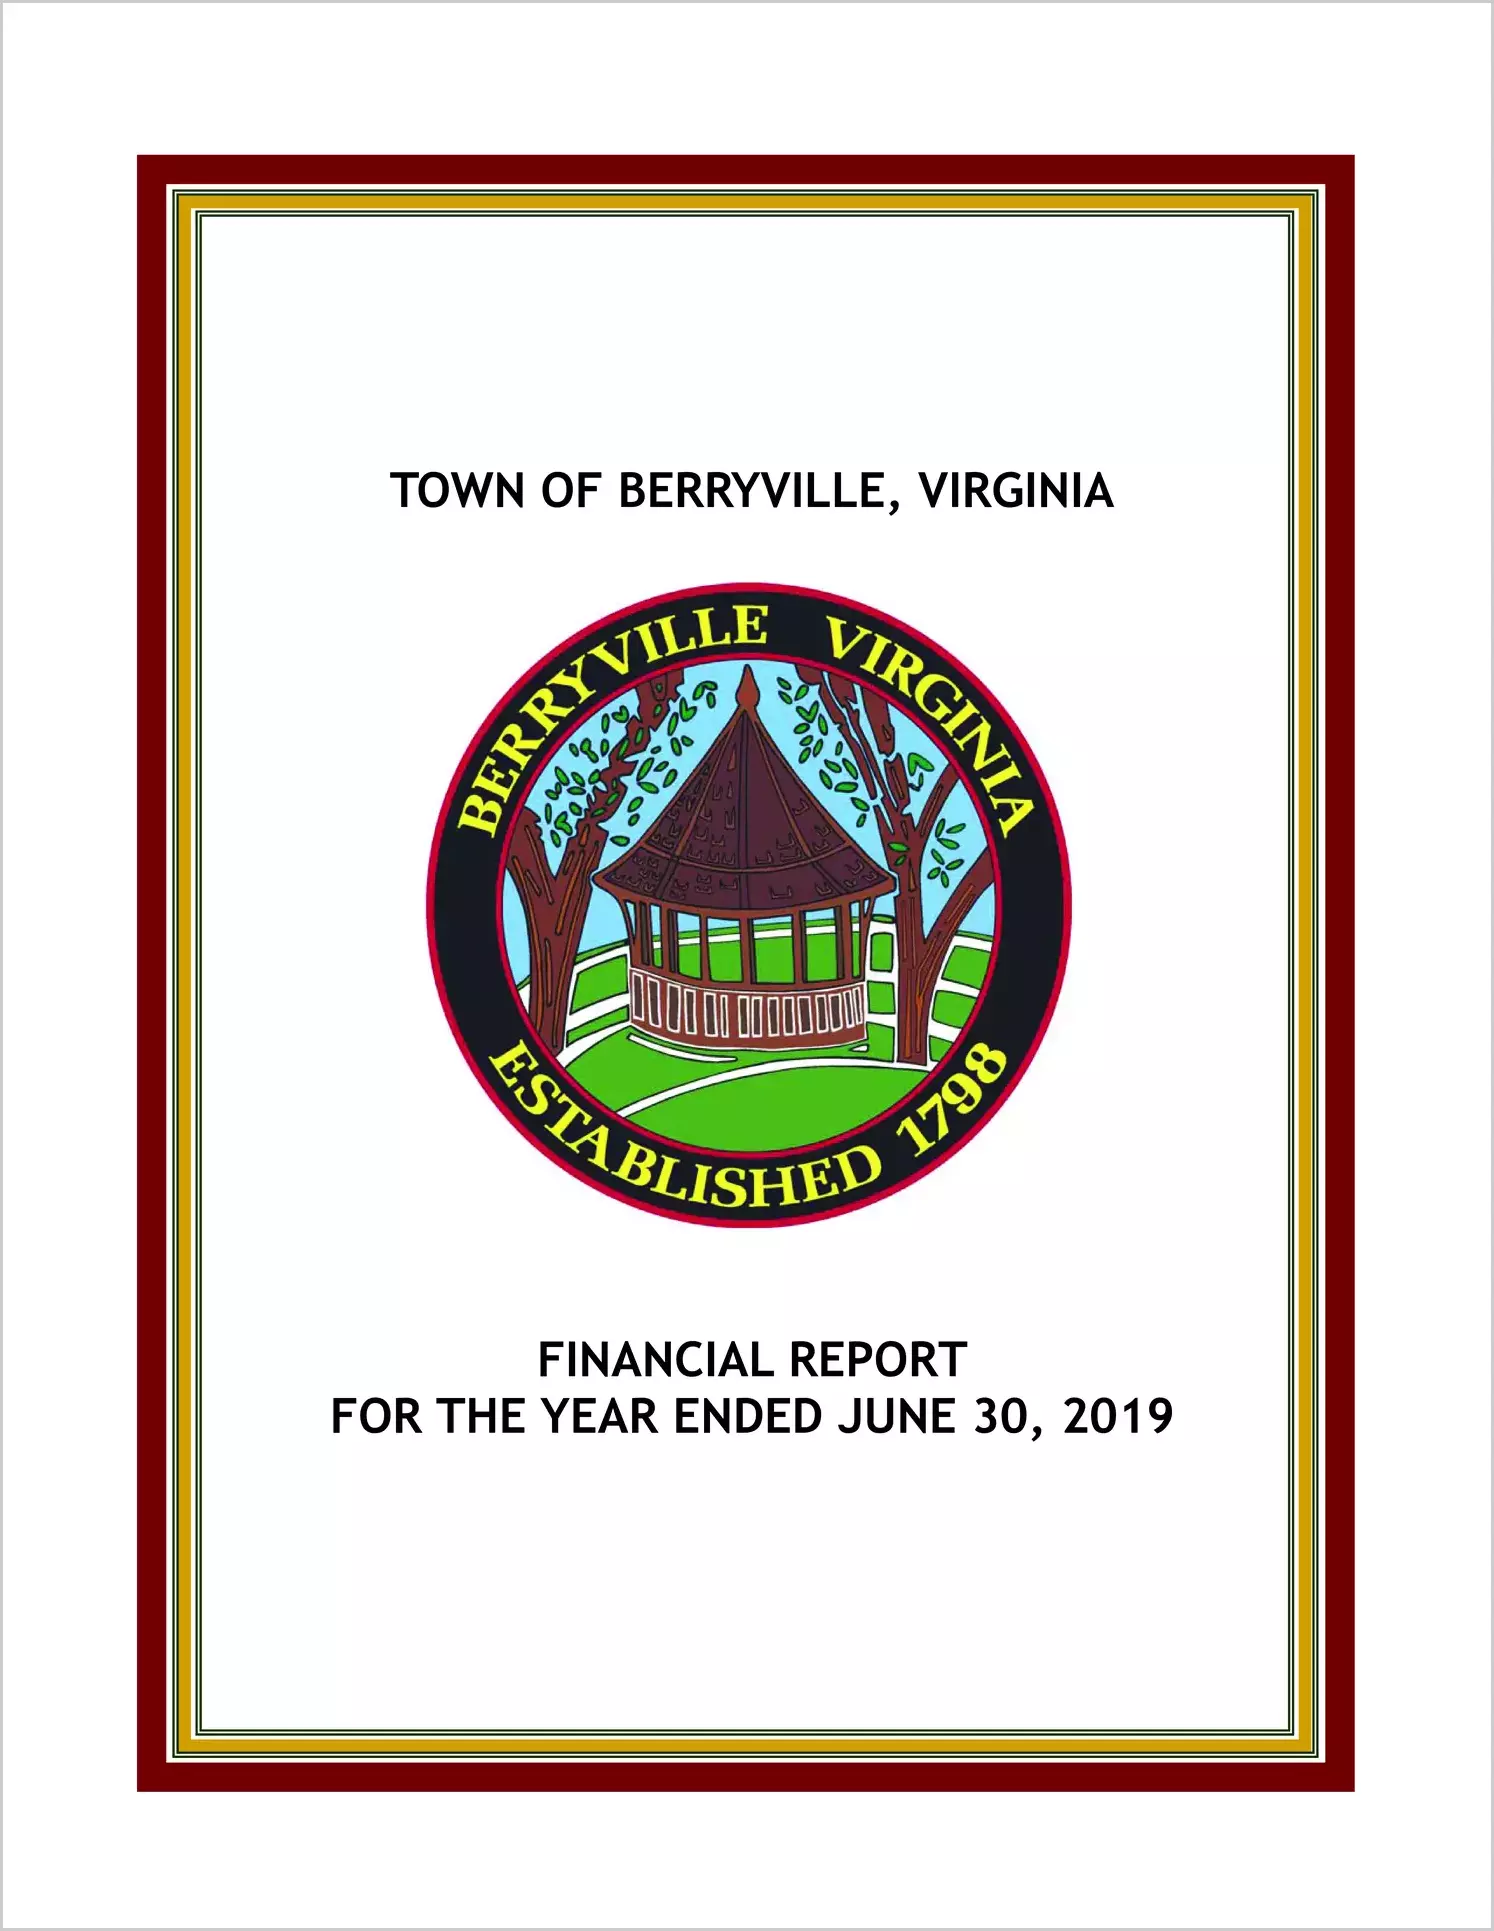 2019 Annual Financial Report for Town of Berryville